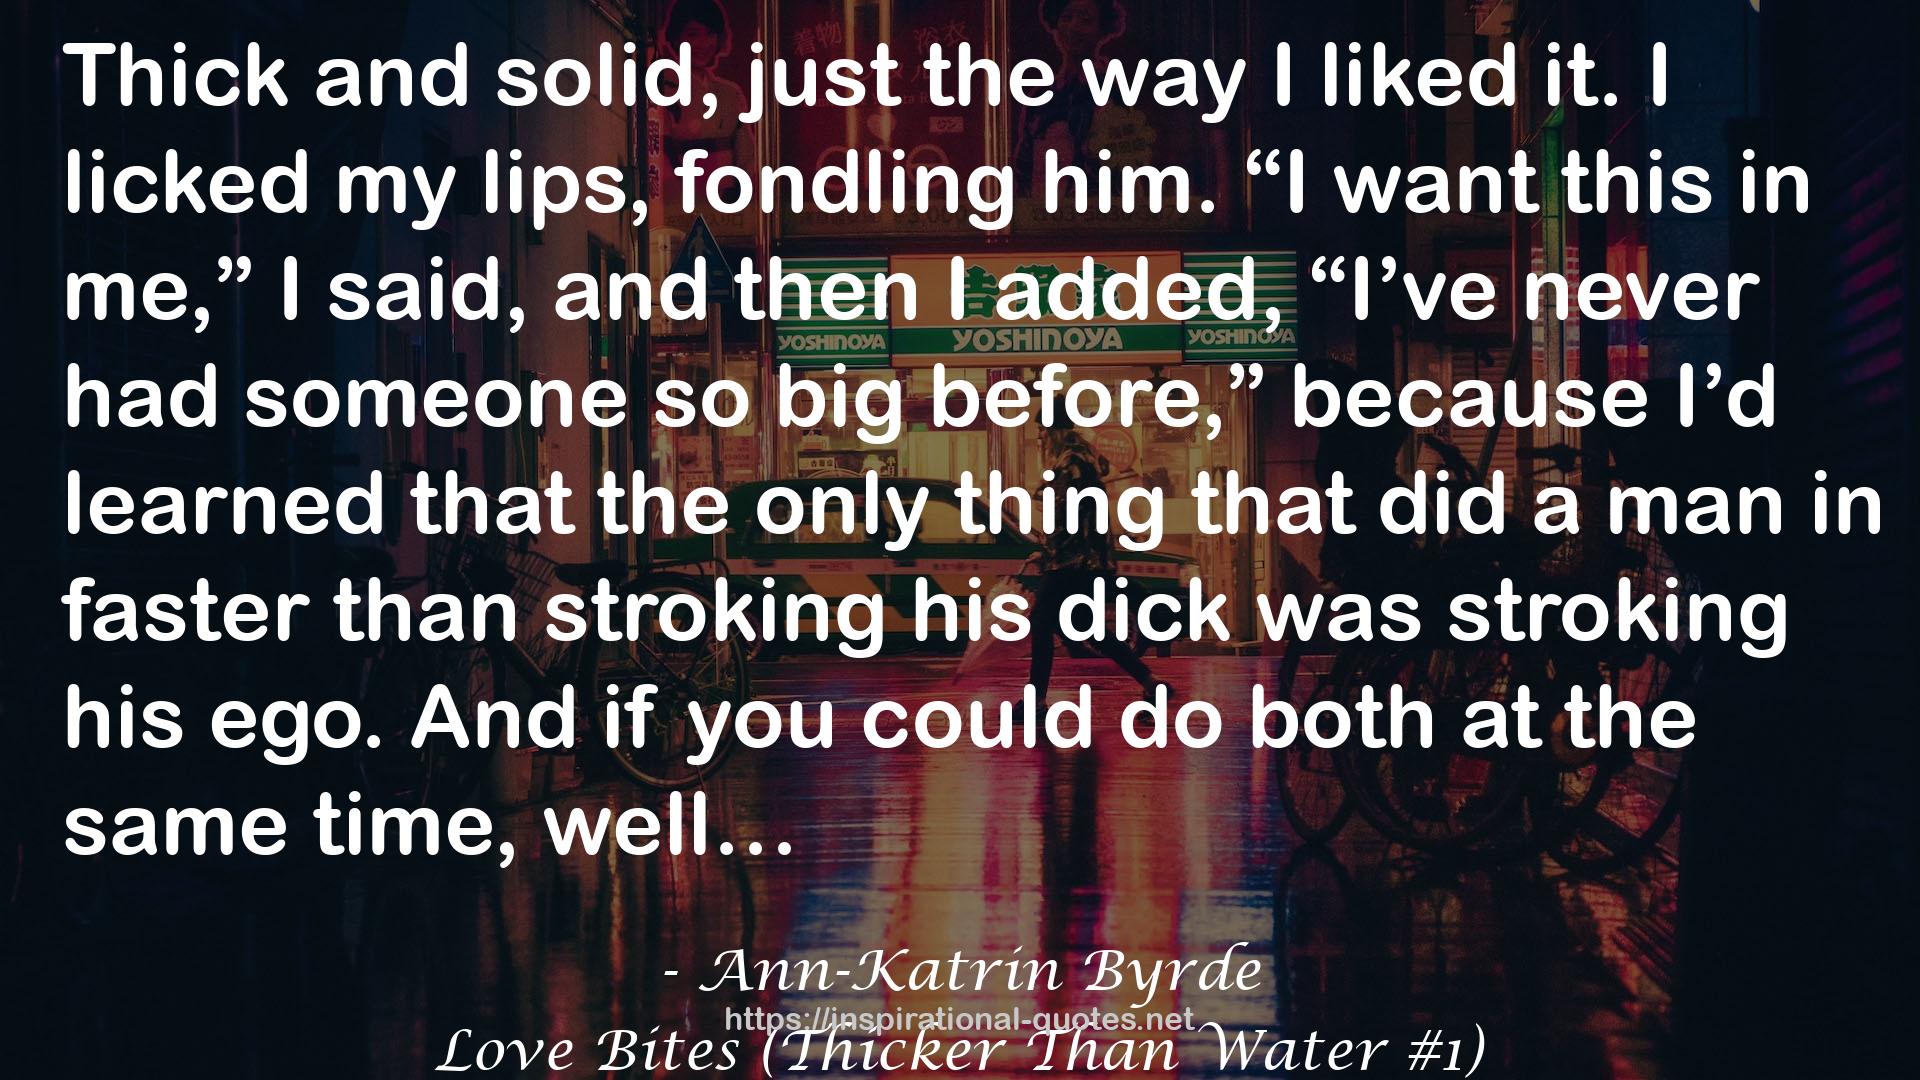 Love Bites (Thicker Than Water #1) QUOTES